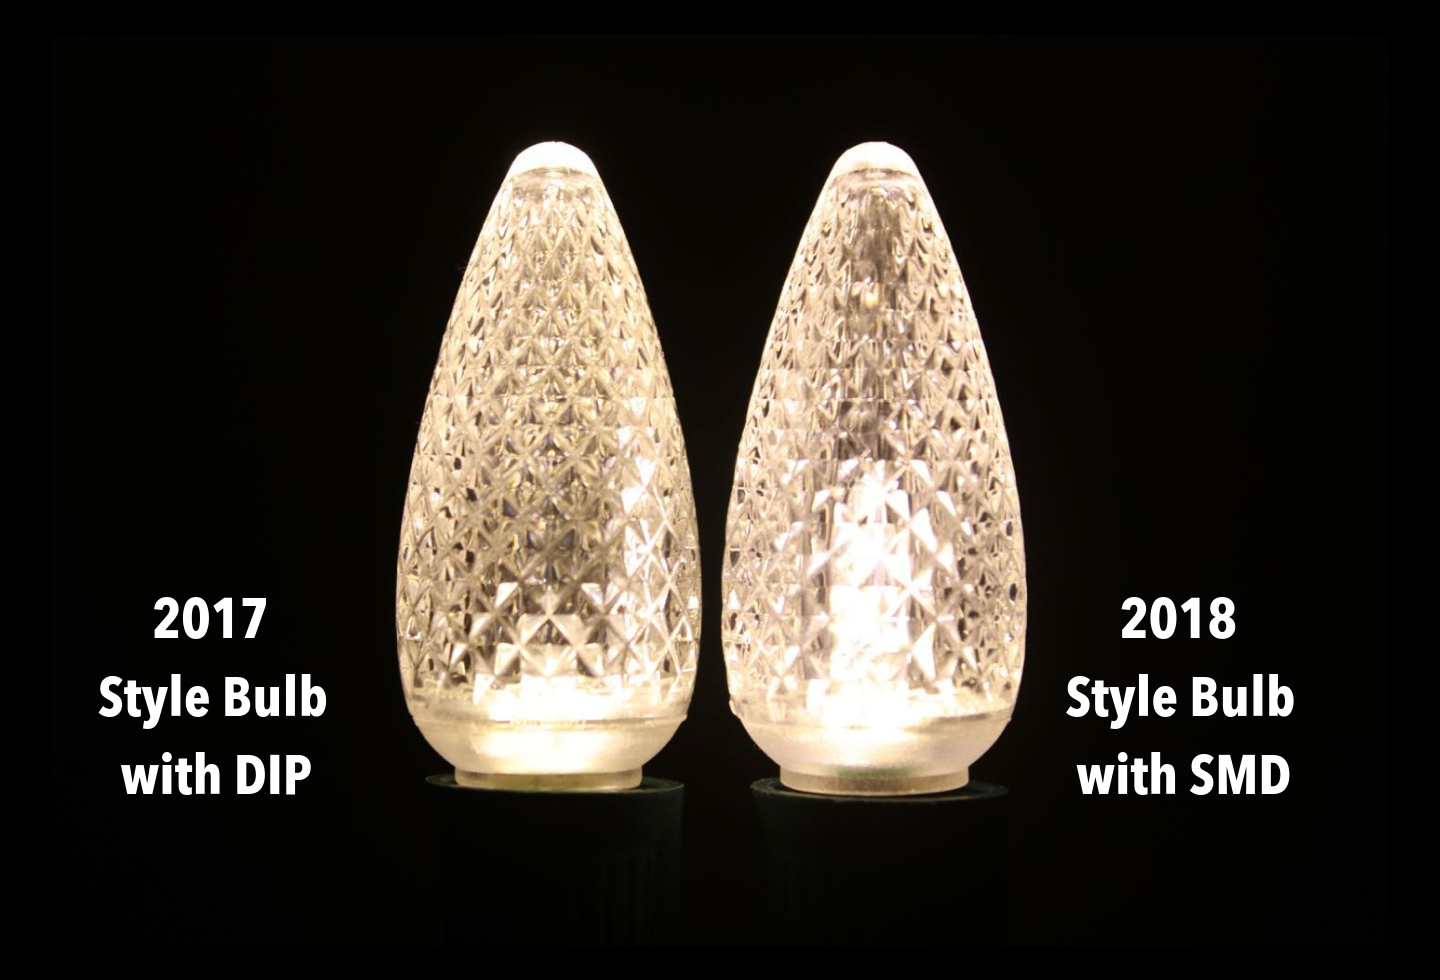 What are SMD bulbs? SMD vs DIP LEDs